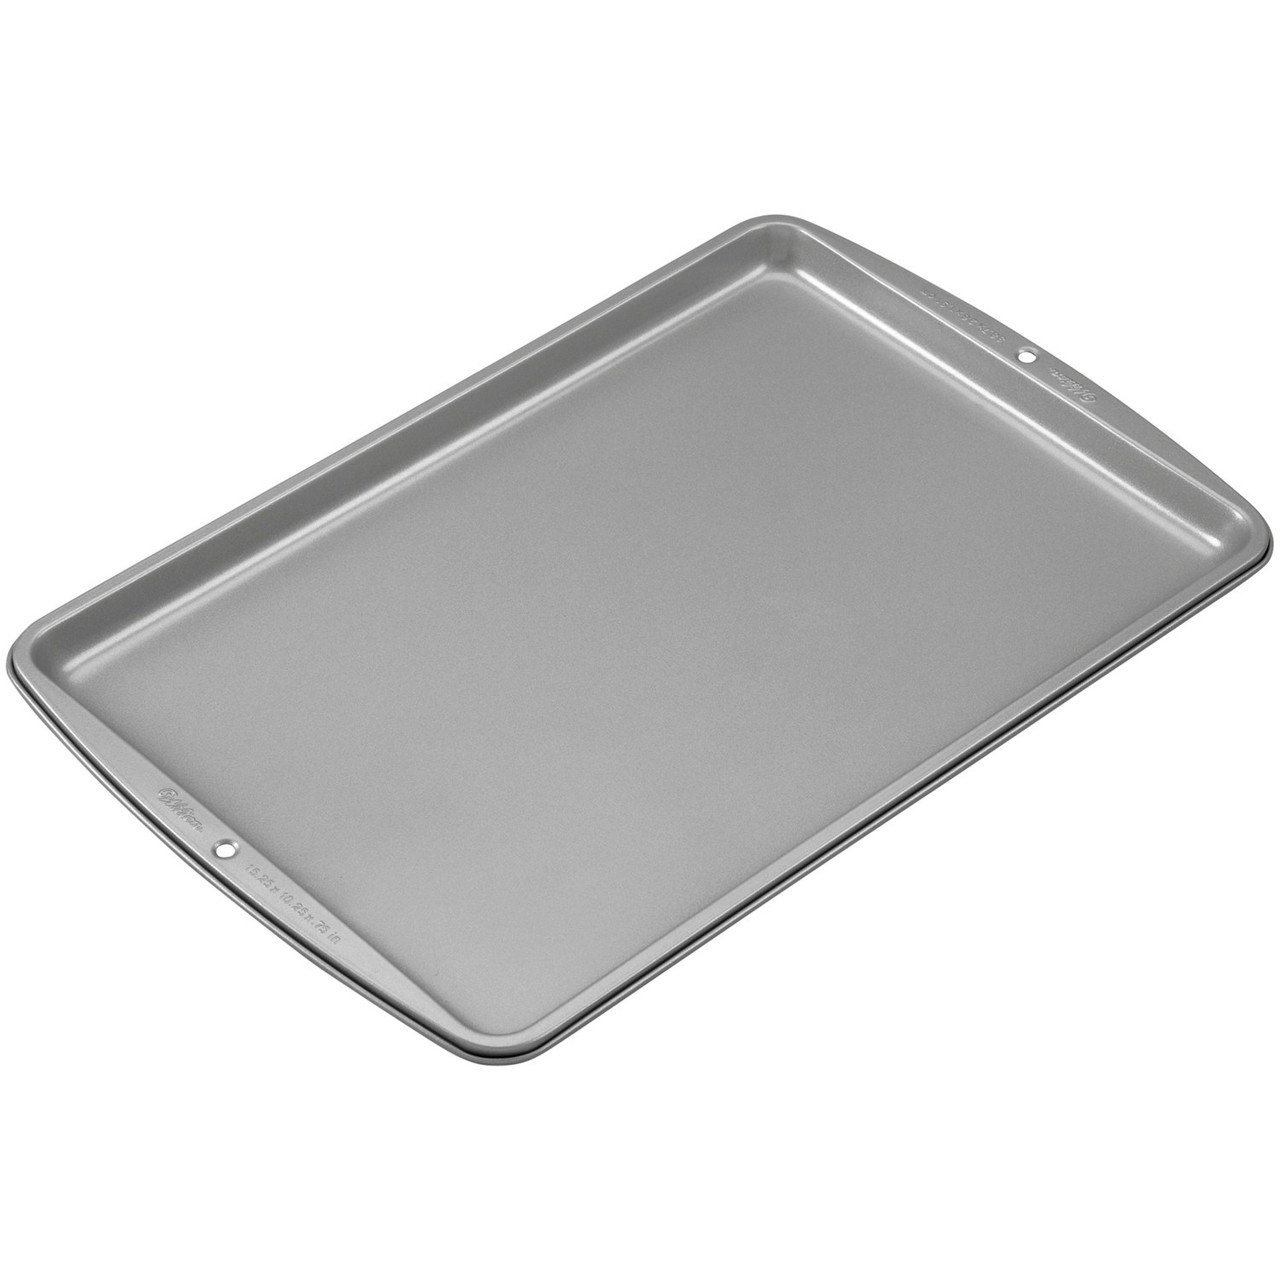 Recipe Right Large Air Cookie Sheet